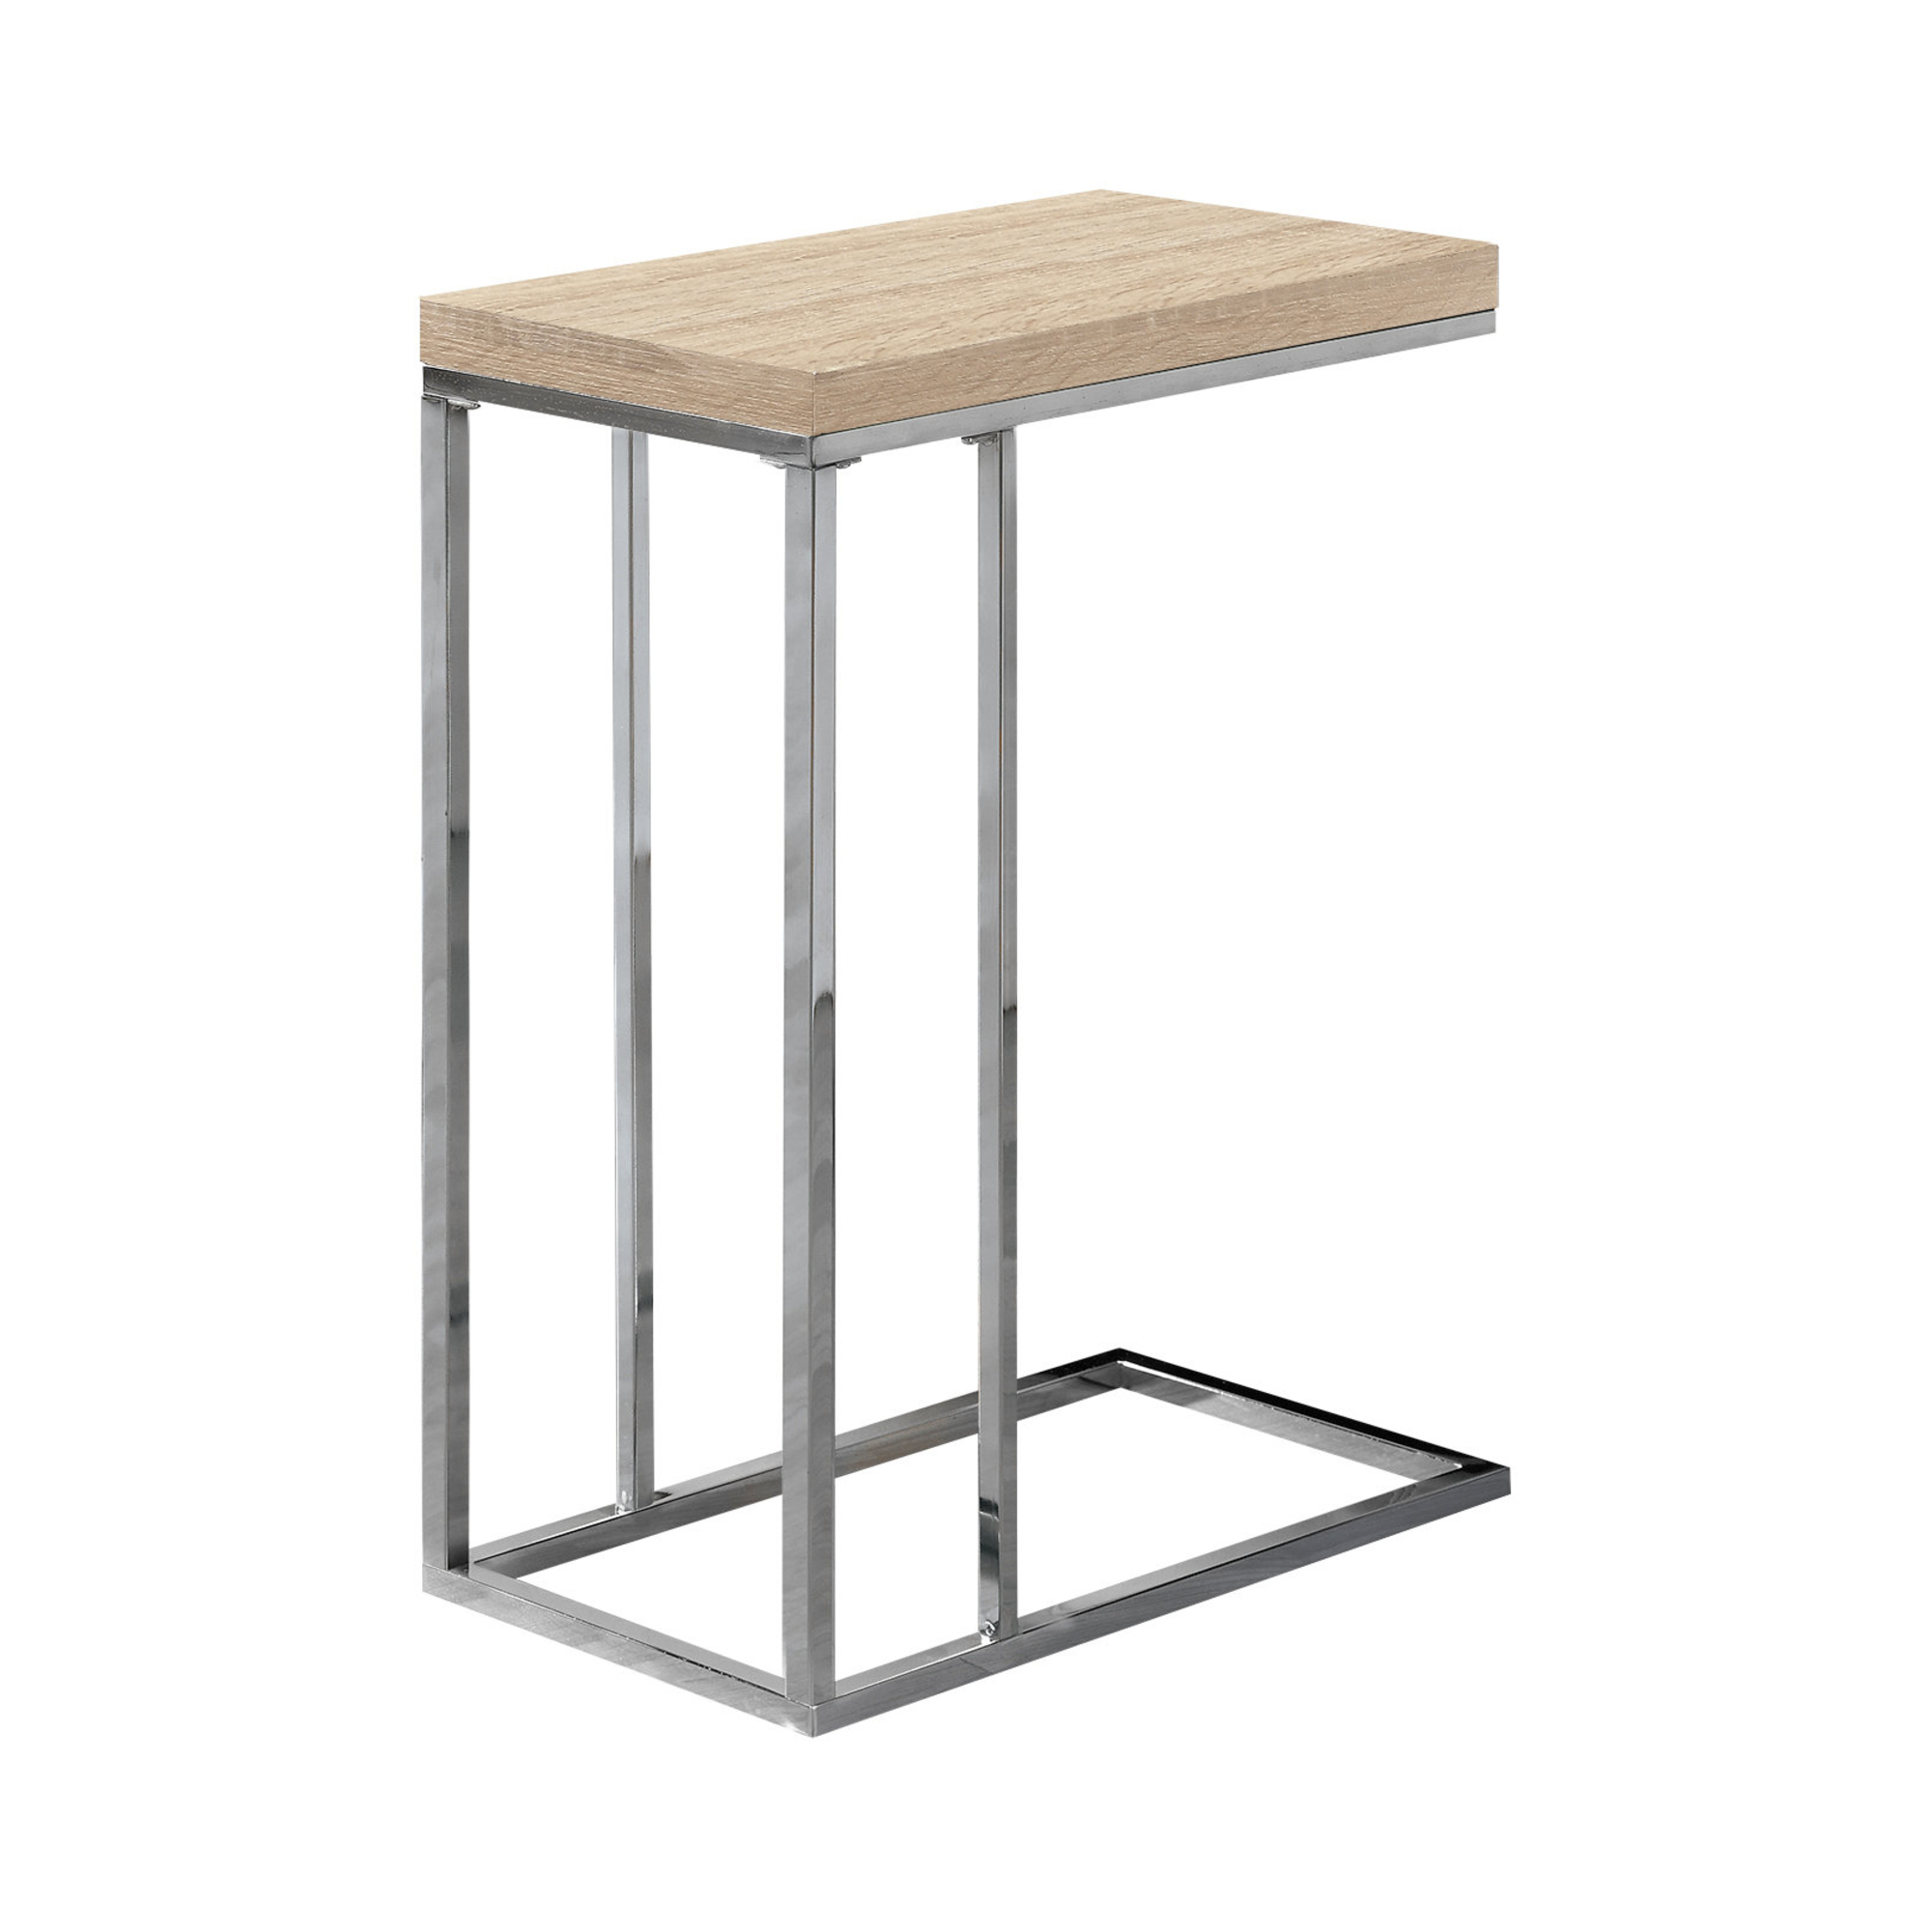 18.25" x 10.25" x 25.25" Natural Particle Board Metal Accent Table